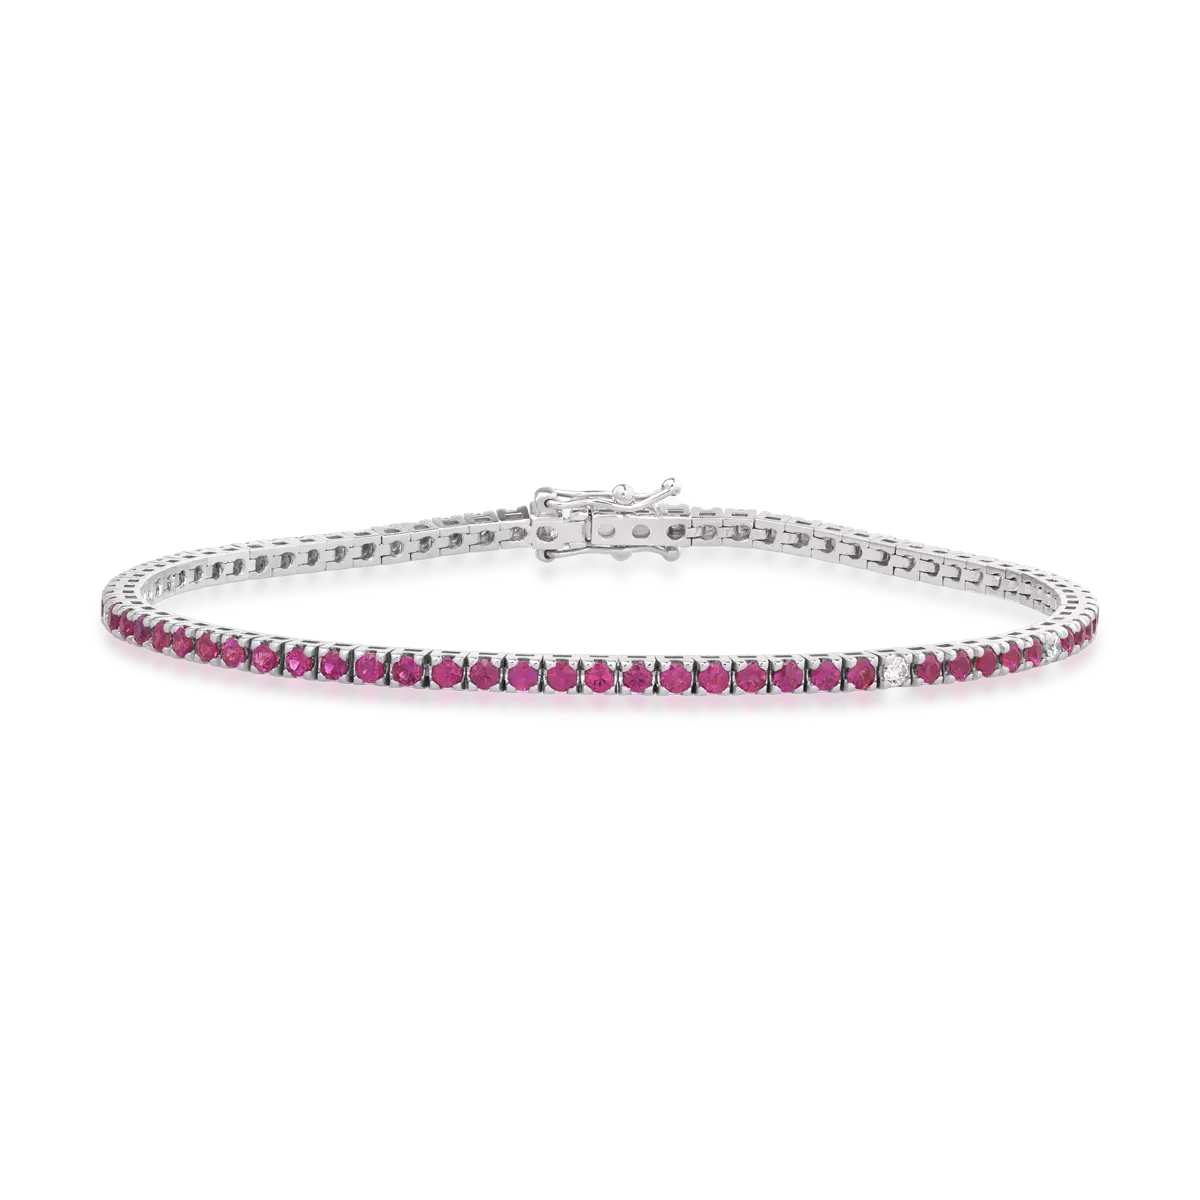 18K white gold bracelet with 1.75ct rubies and 0.1ct diamonds